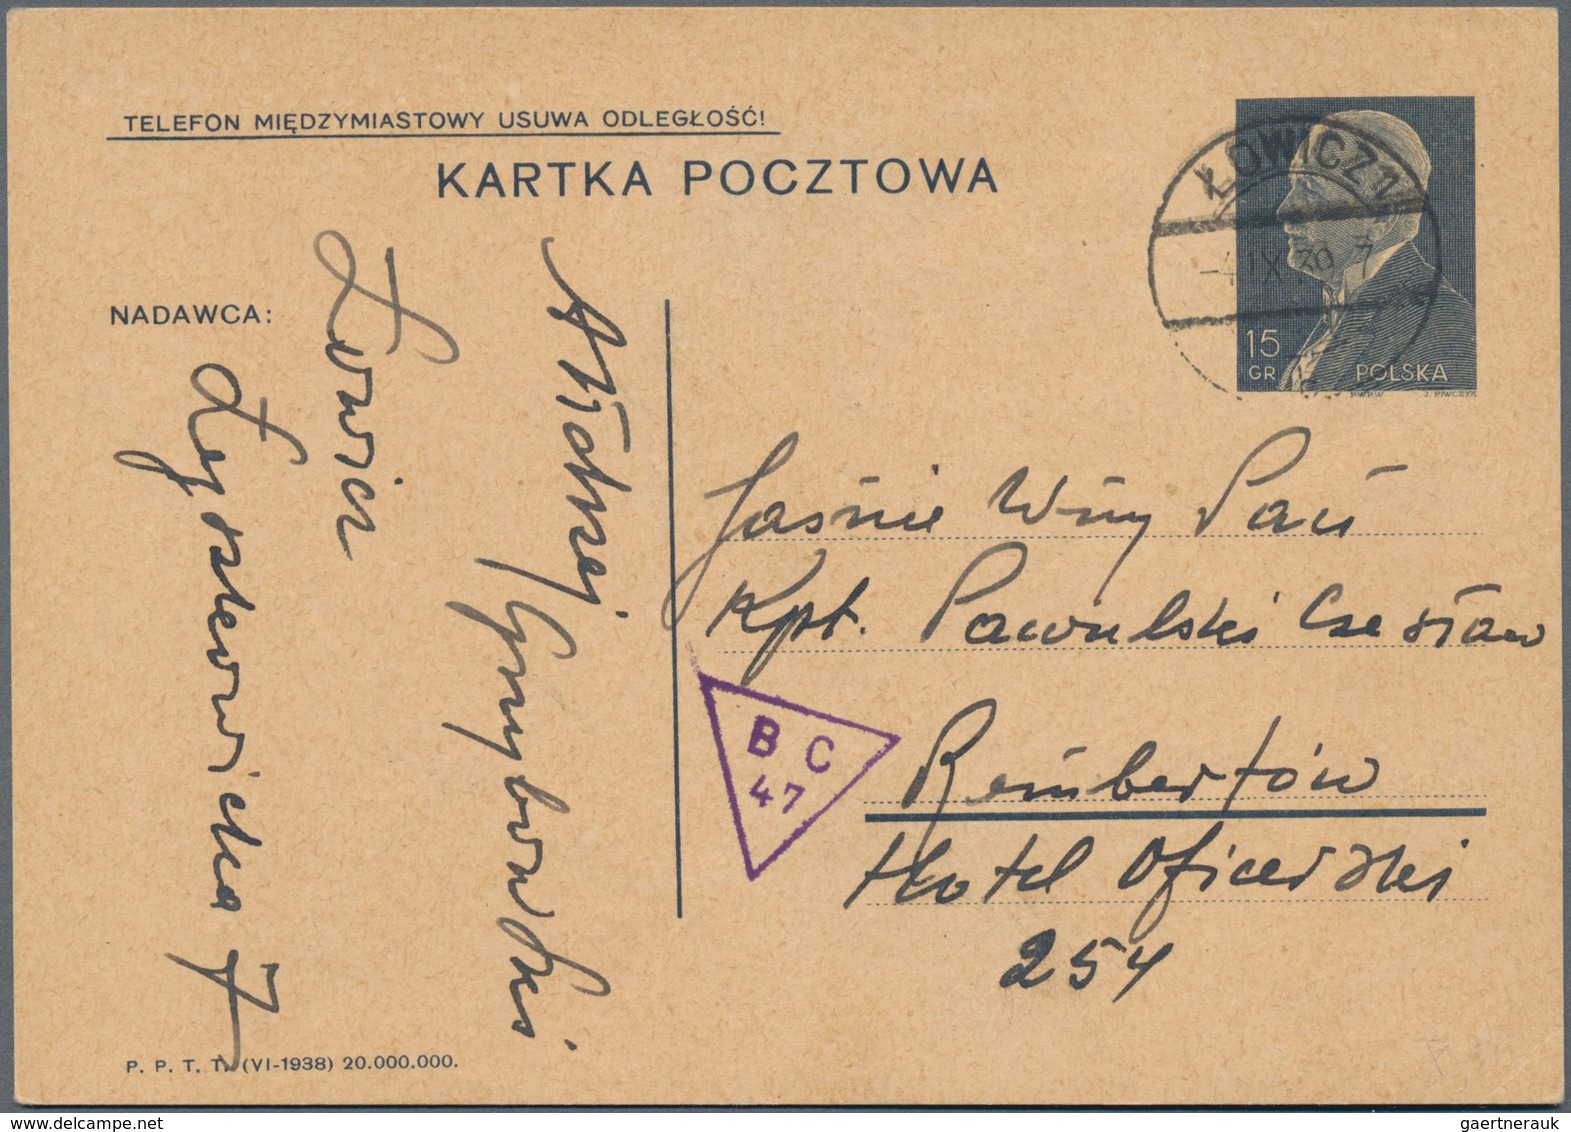 Polen - Ganzsachen: 1939, 15 Gr. Stat. Card Written 2 SEP. 39 And Posted From "LOWICZ 4. IX.39" With - Enteros Postales